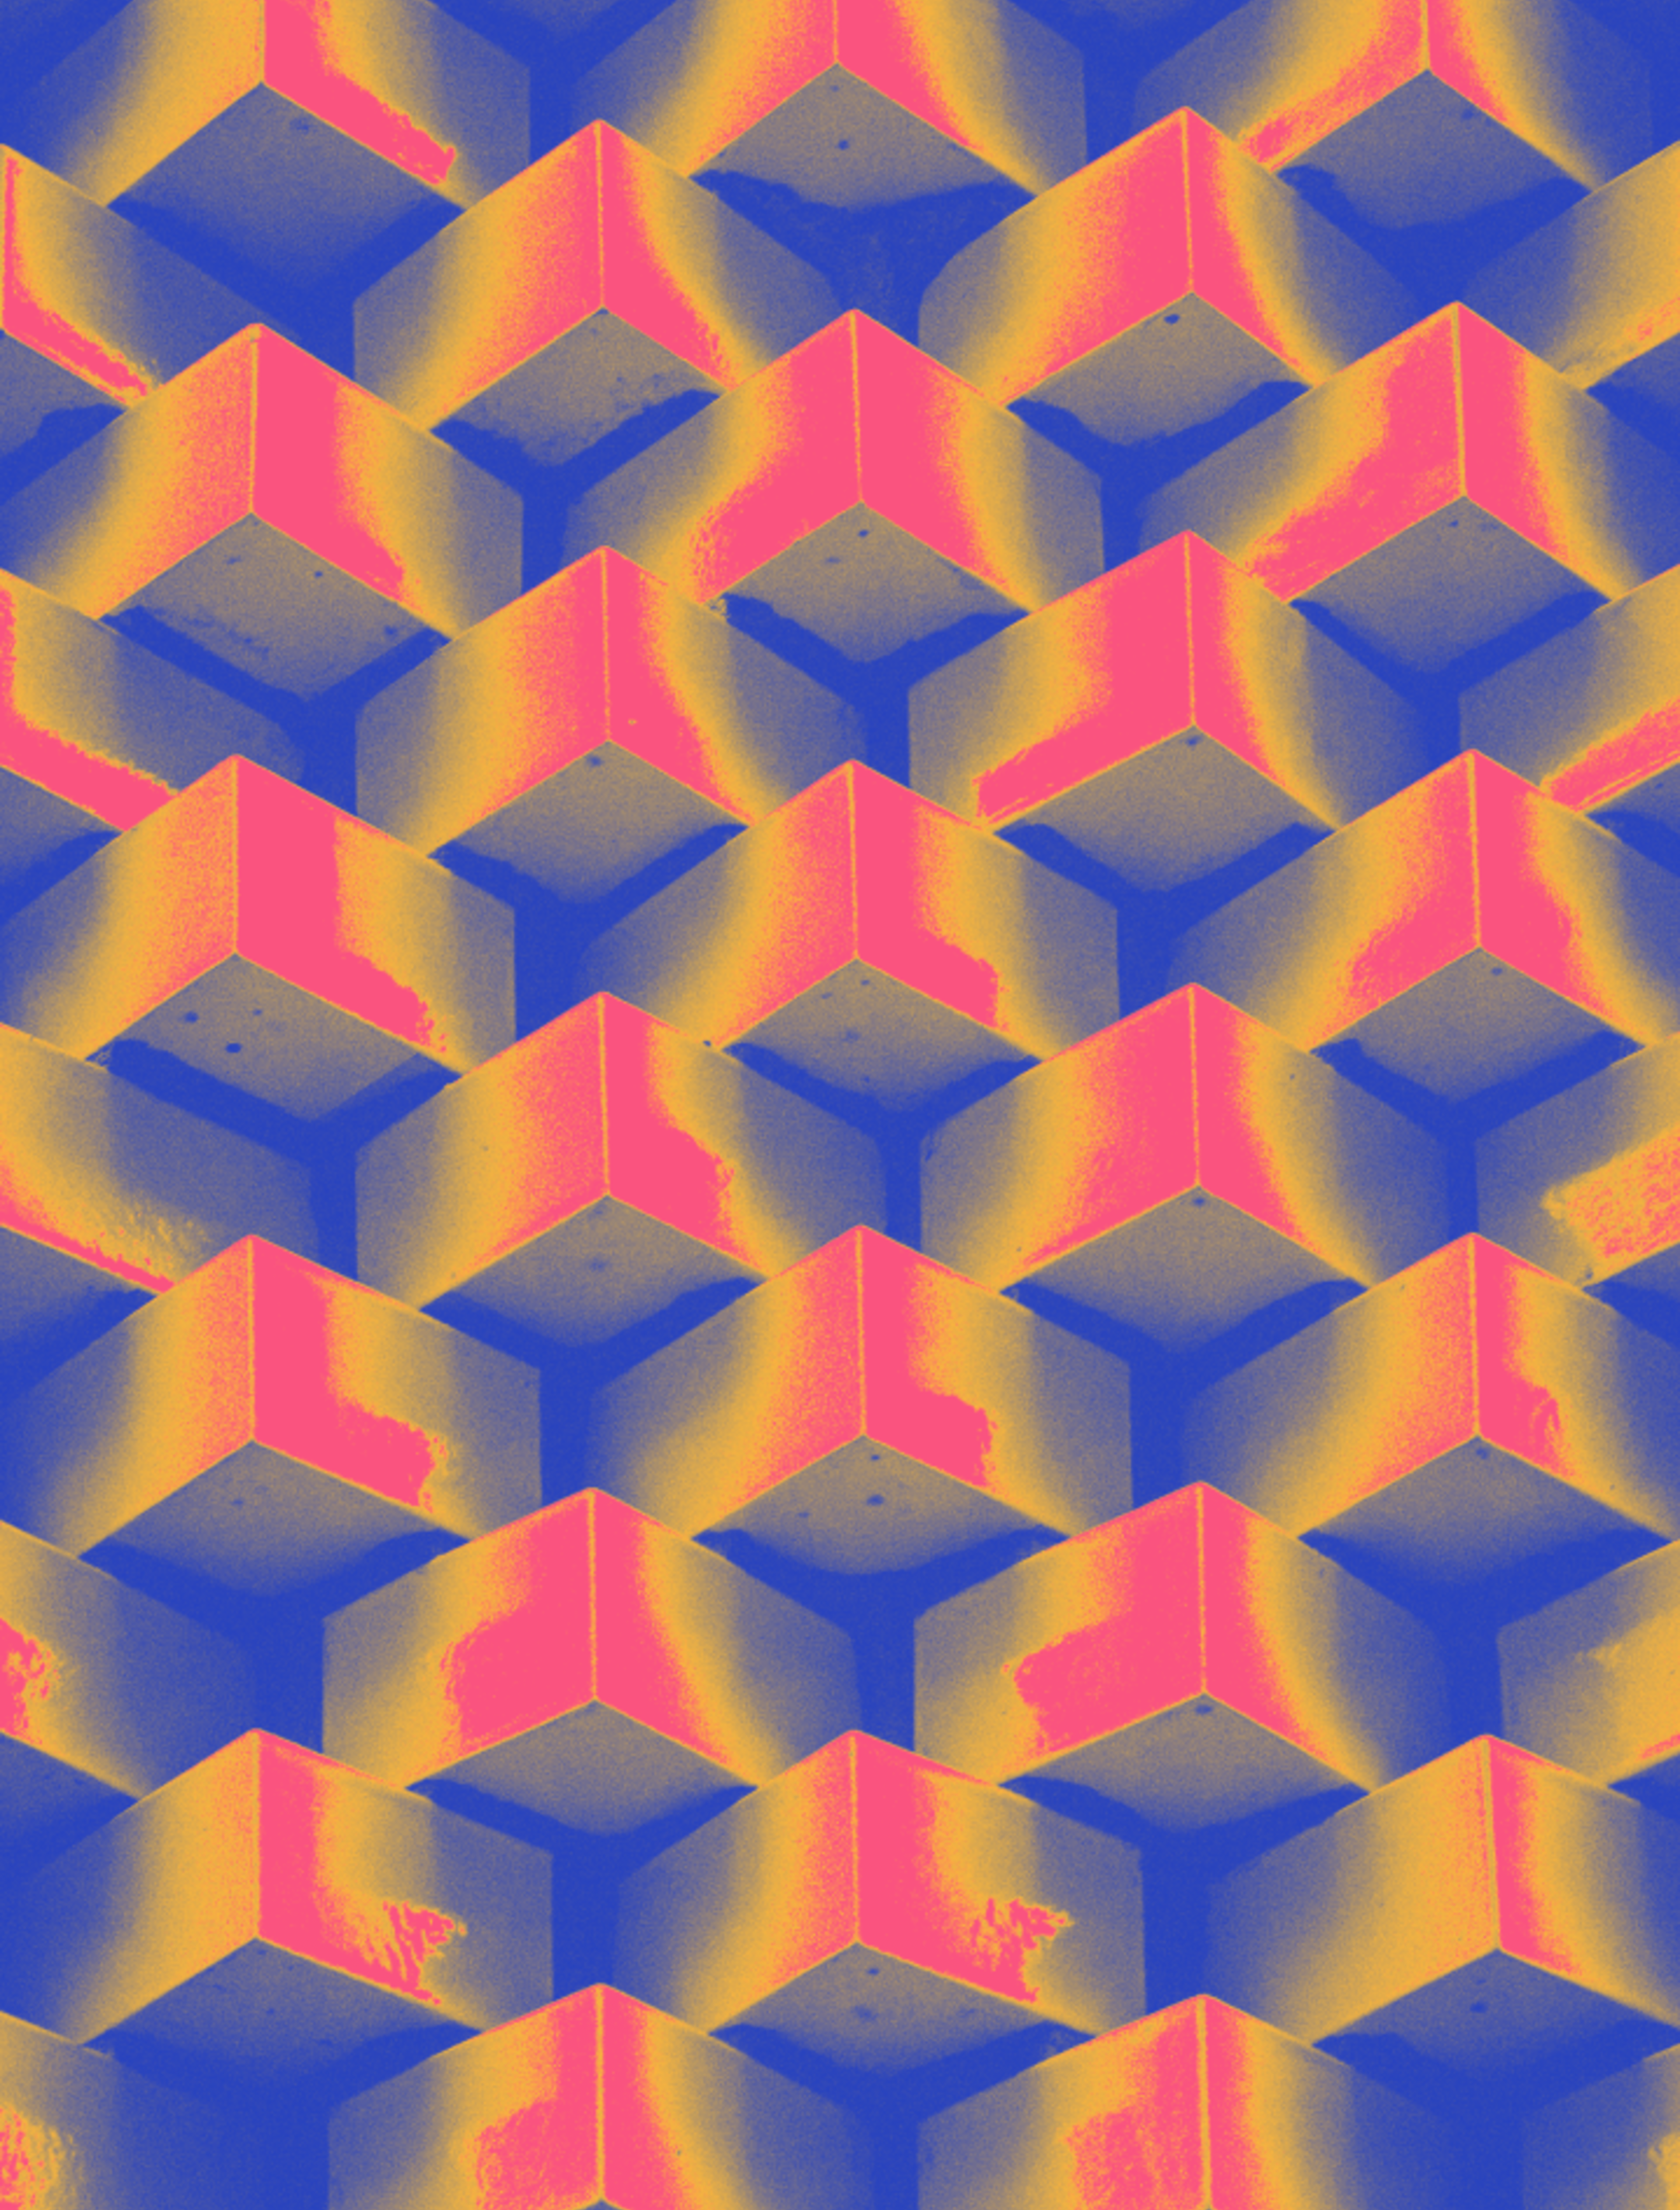 An image pattern of inter-connected blocks.